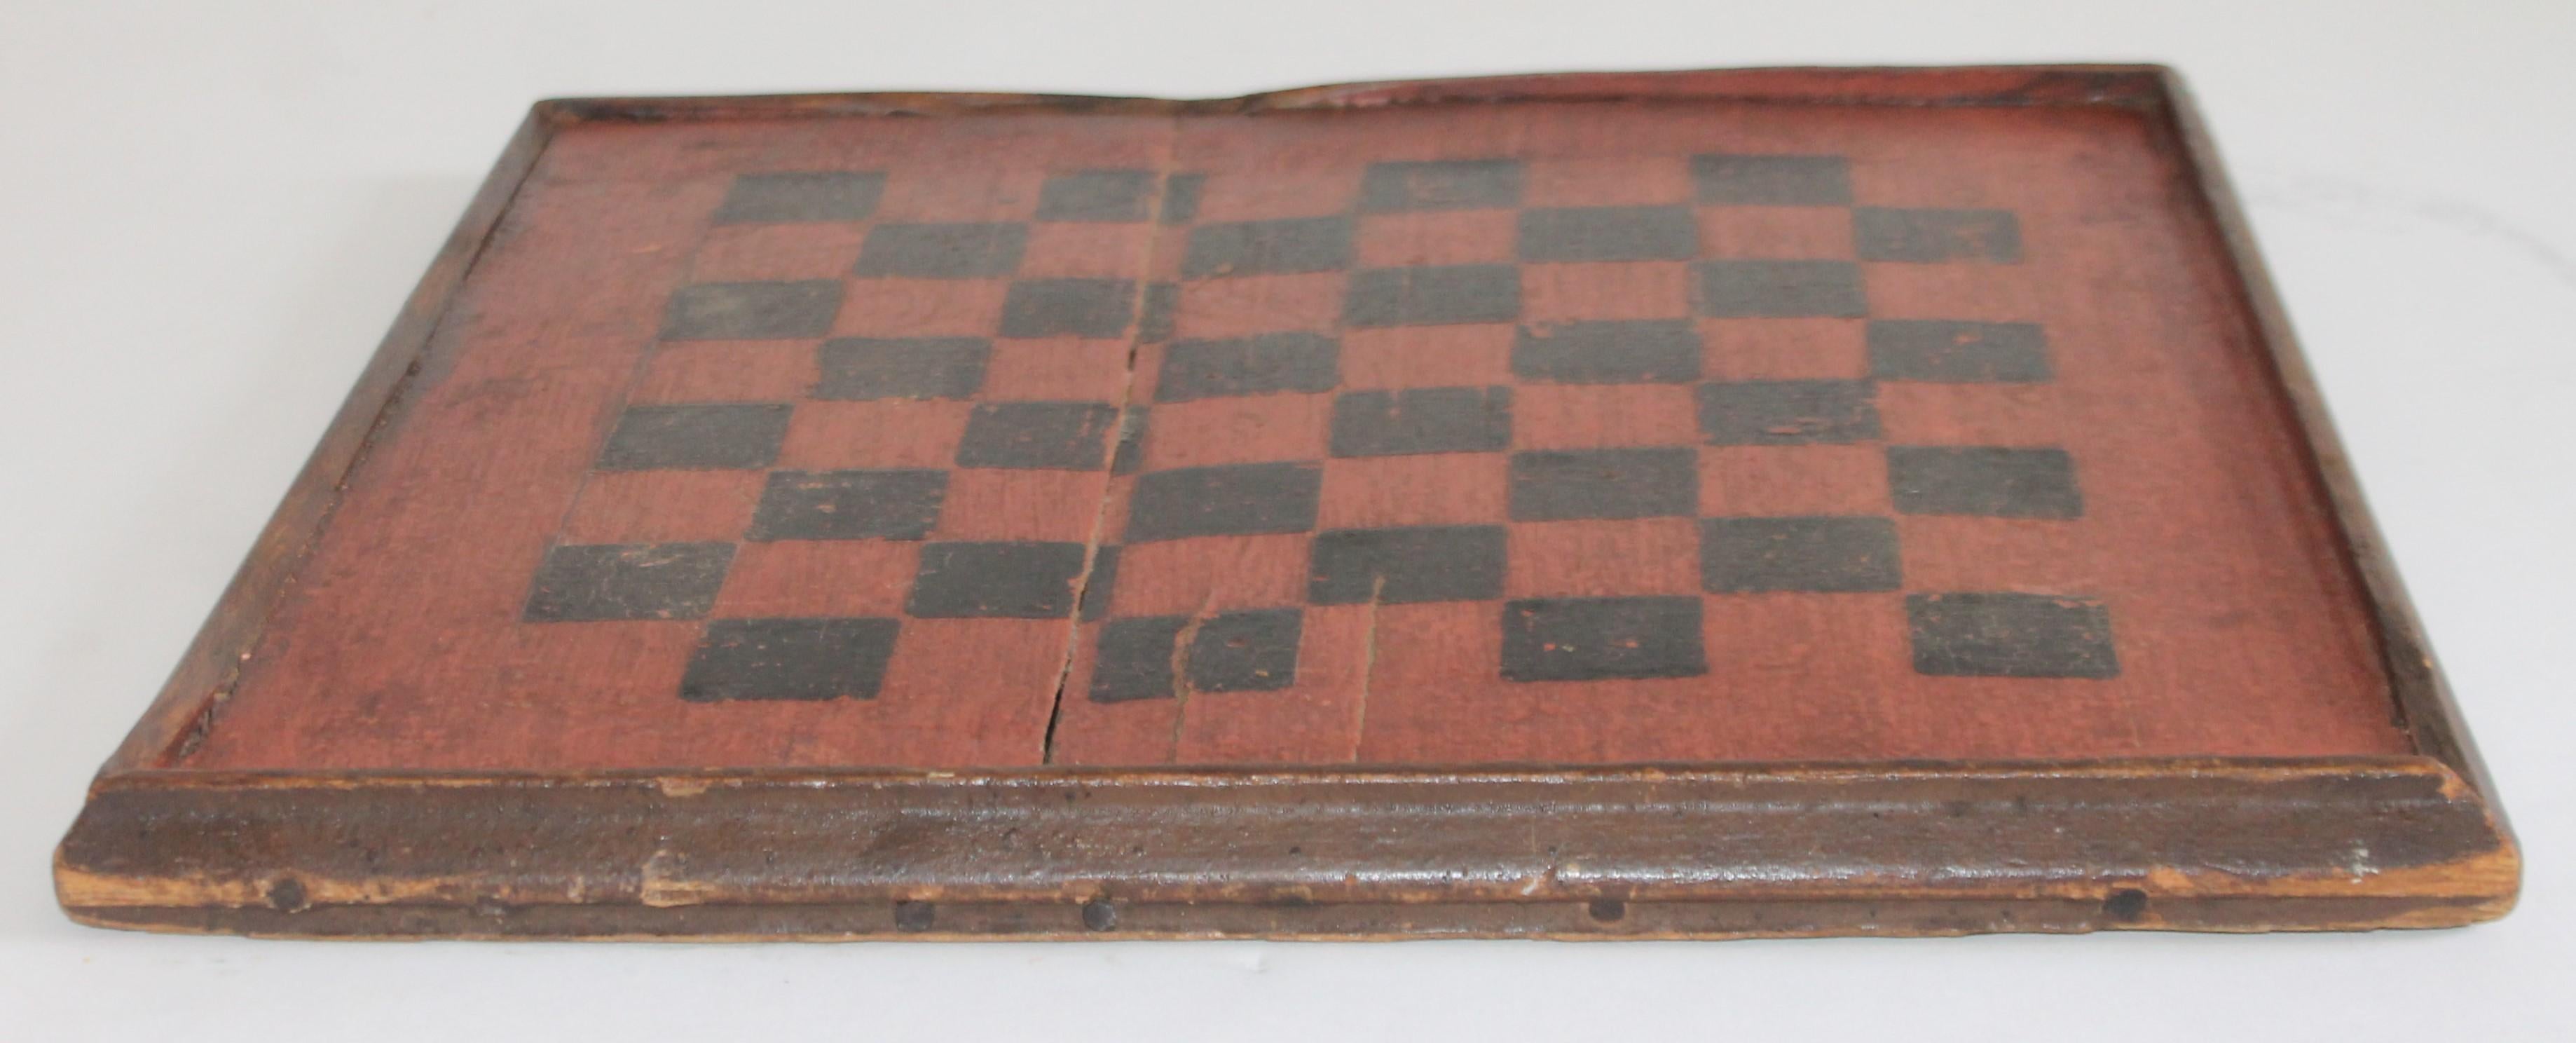 This folky handmade original bitter sweet and black painted surface game board has original picture frame molding and in good condition. This game board has a worn molding trim and wonderful aged patina. Minor age cracks in trim consistent from age